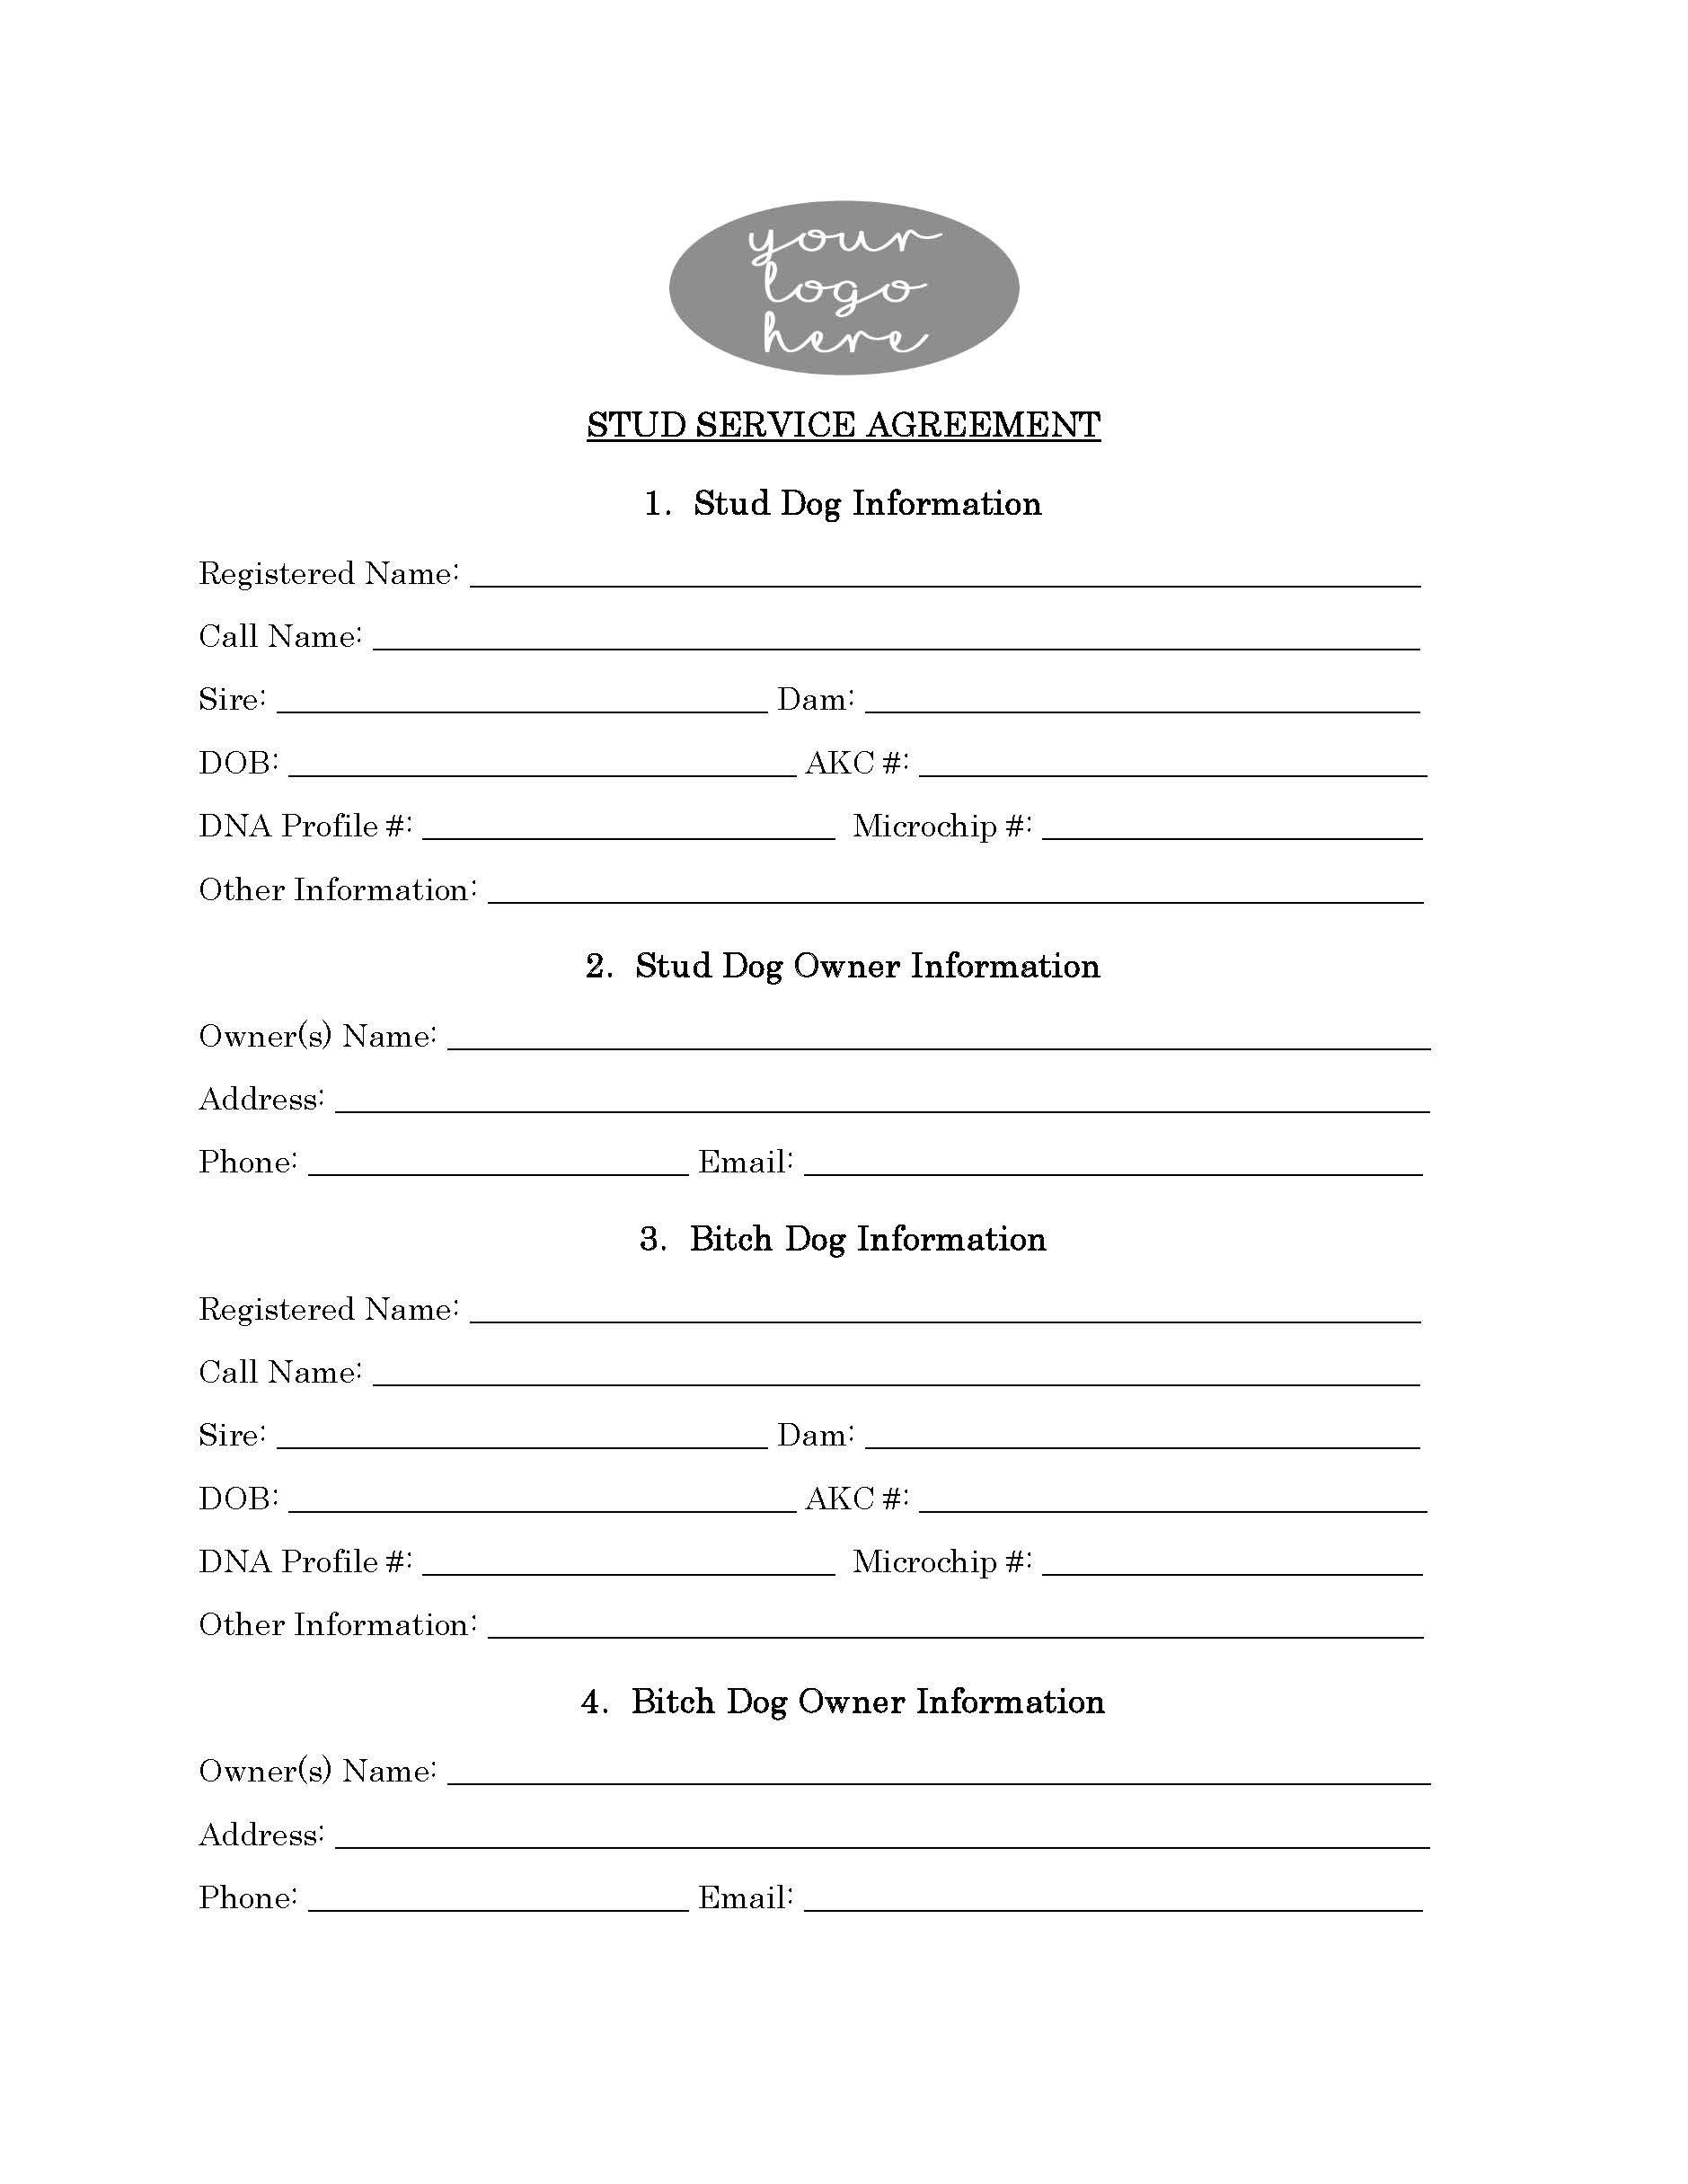 stud-dog-breeding-contract-template-attorney-written-etsy